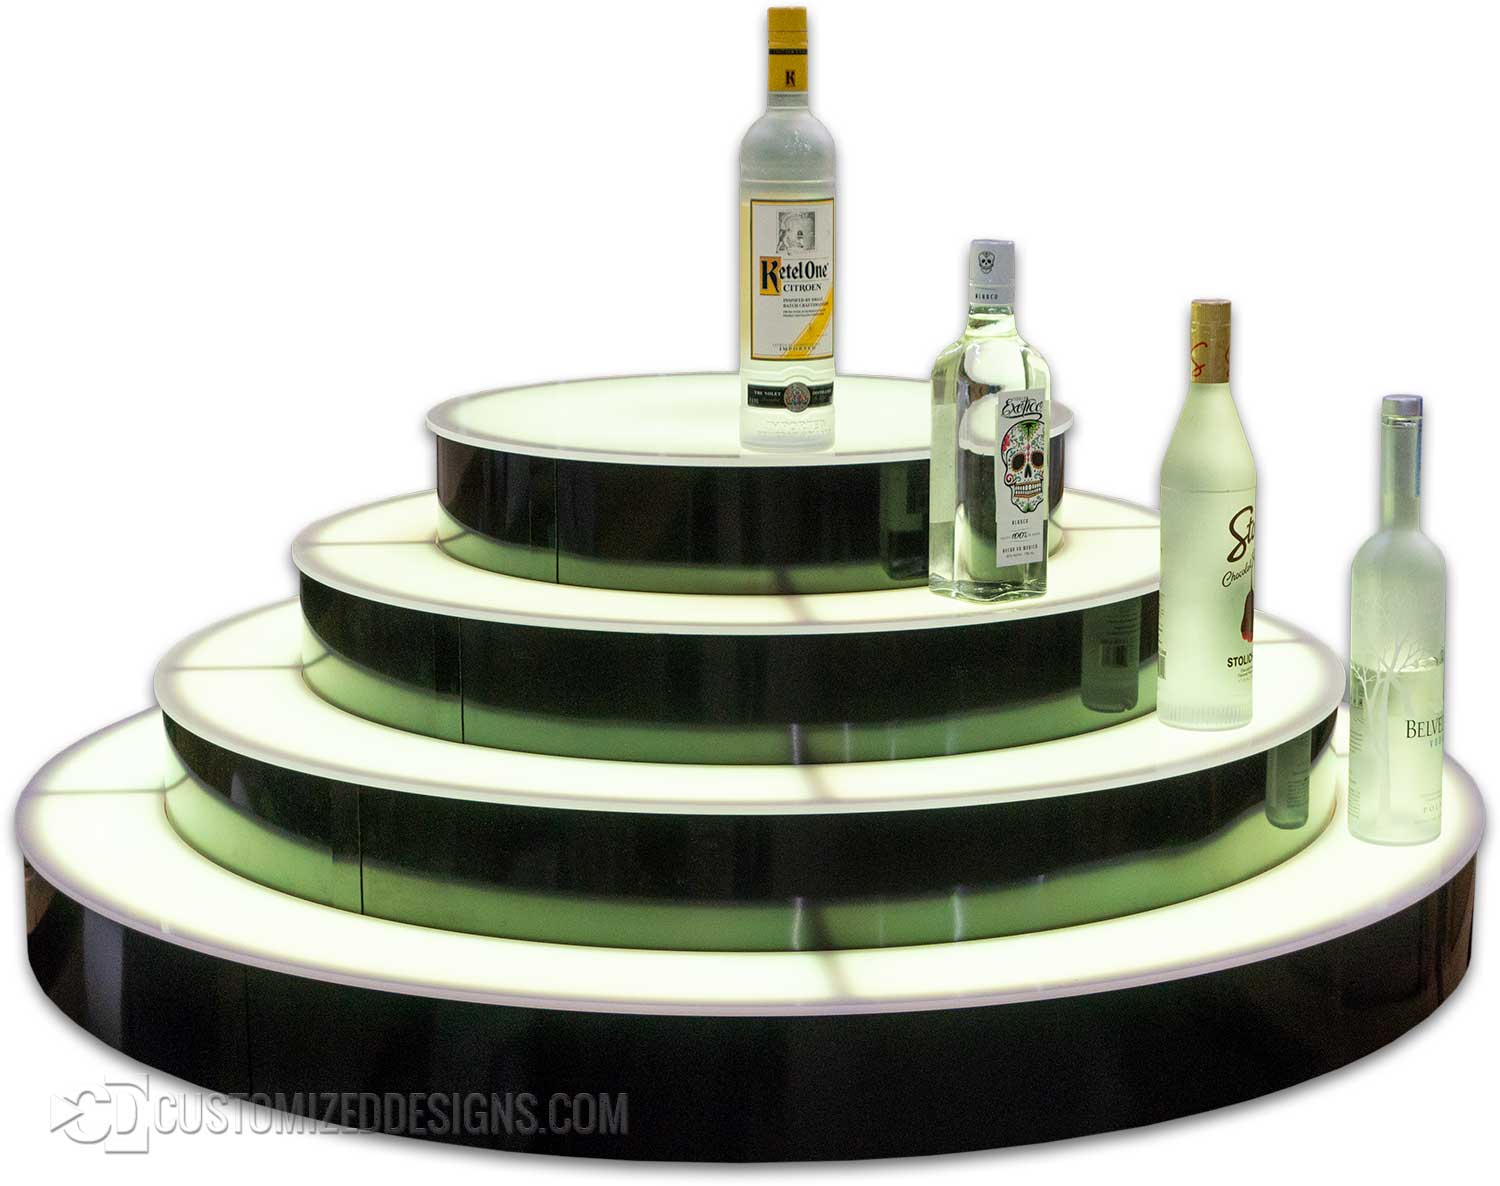 Details about   2 x 3 Tier Circle Wine Beer Drink Bottle Display Stand Acyclic Shop Bar Pub 